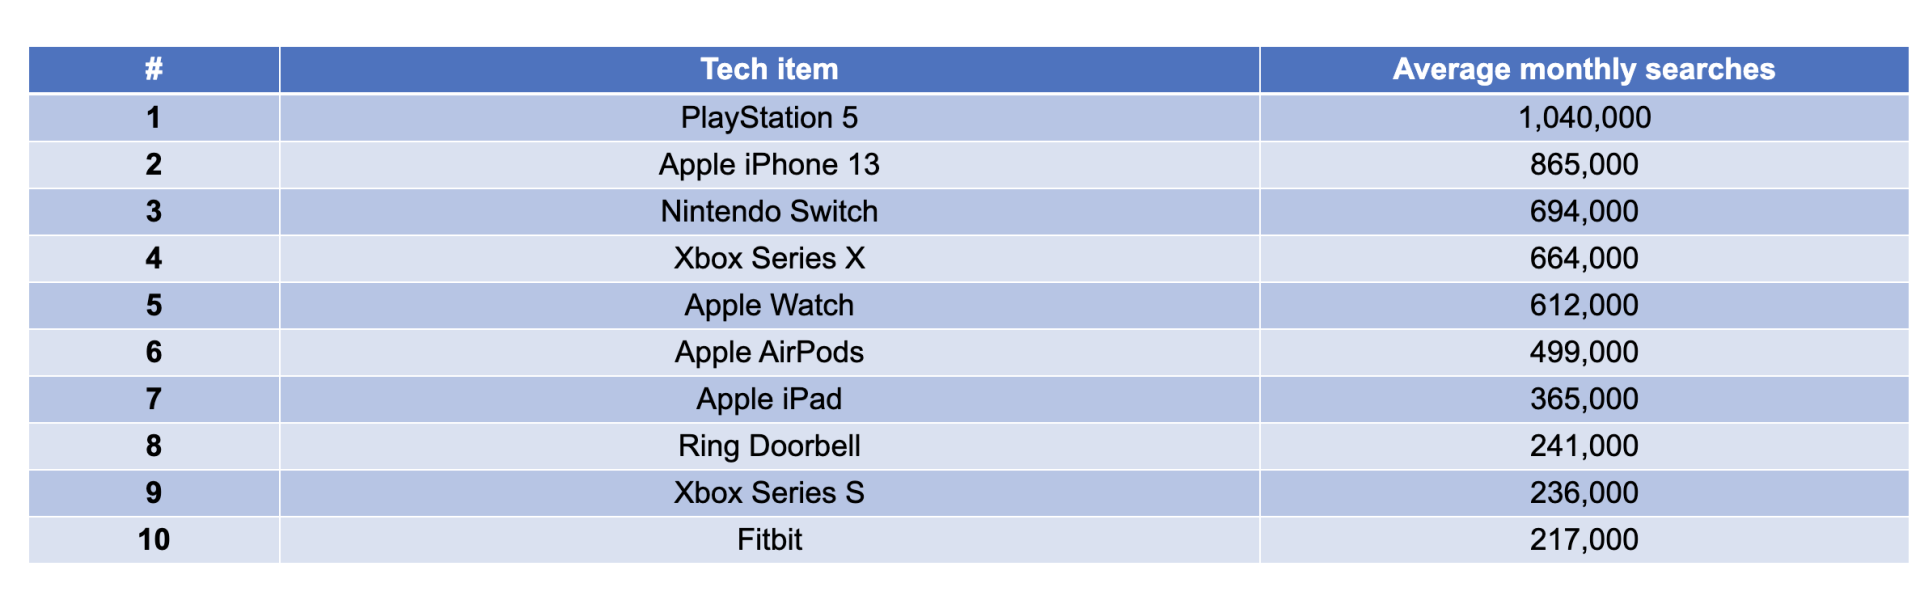 Tech_items.png